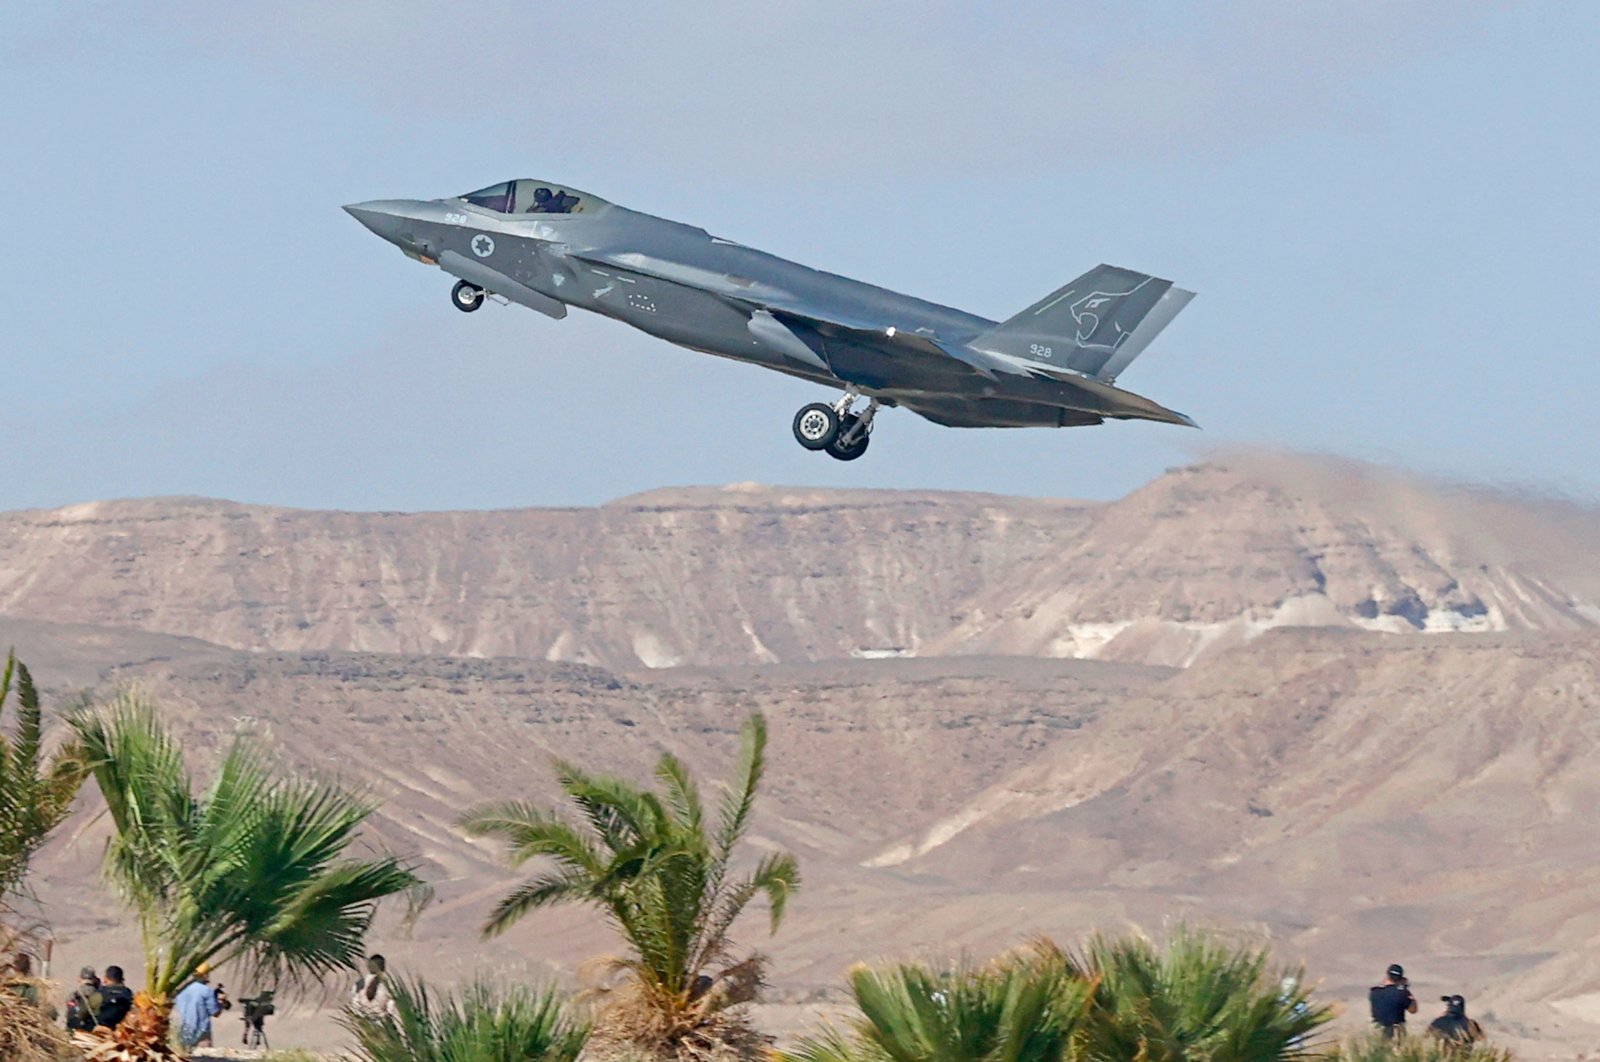 An Israeli air force F-35 fighter takes off during the "Blue Flag" multinational air defense exercise at the Ovda air force base, north of Eilat, Israel, on Oct. 24, 2021. (AFP Photo)